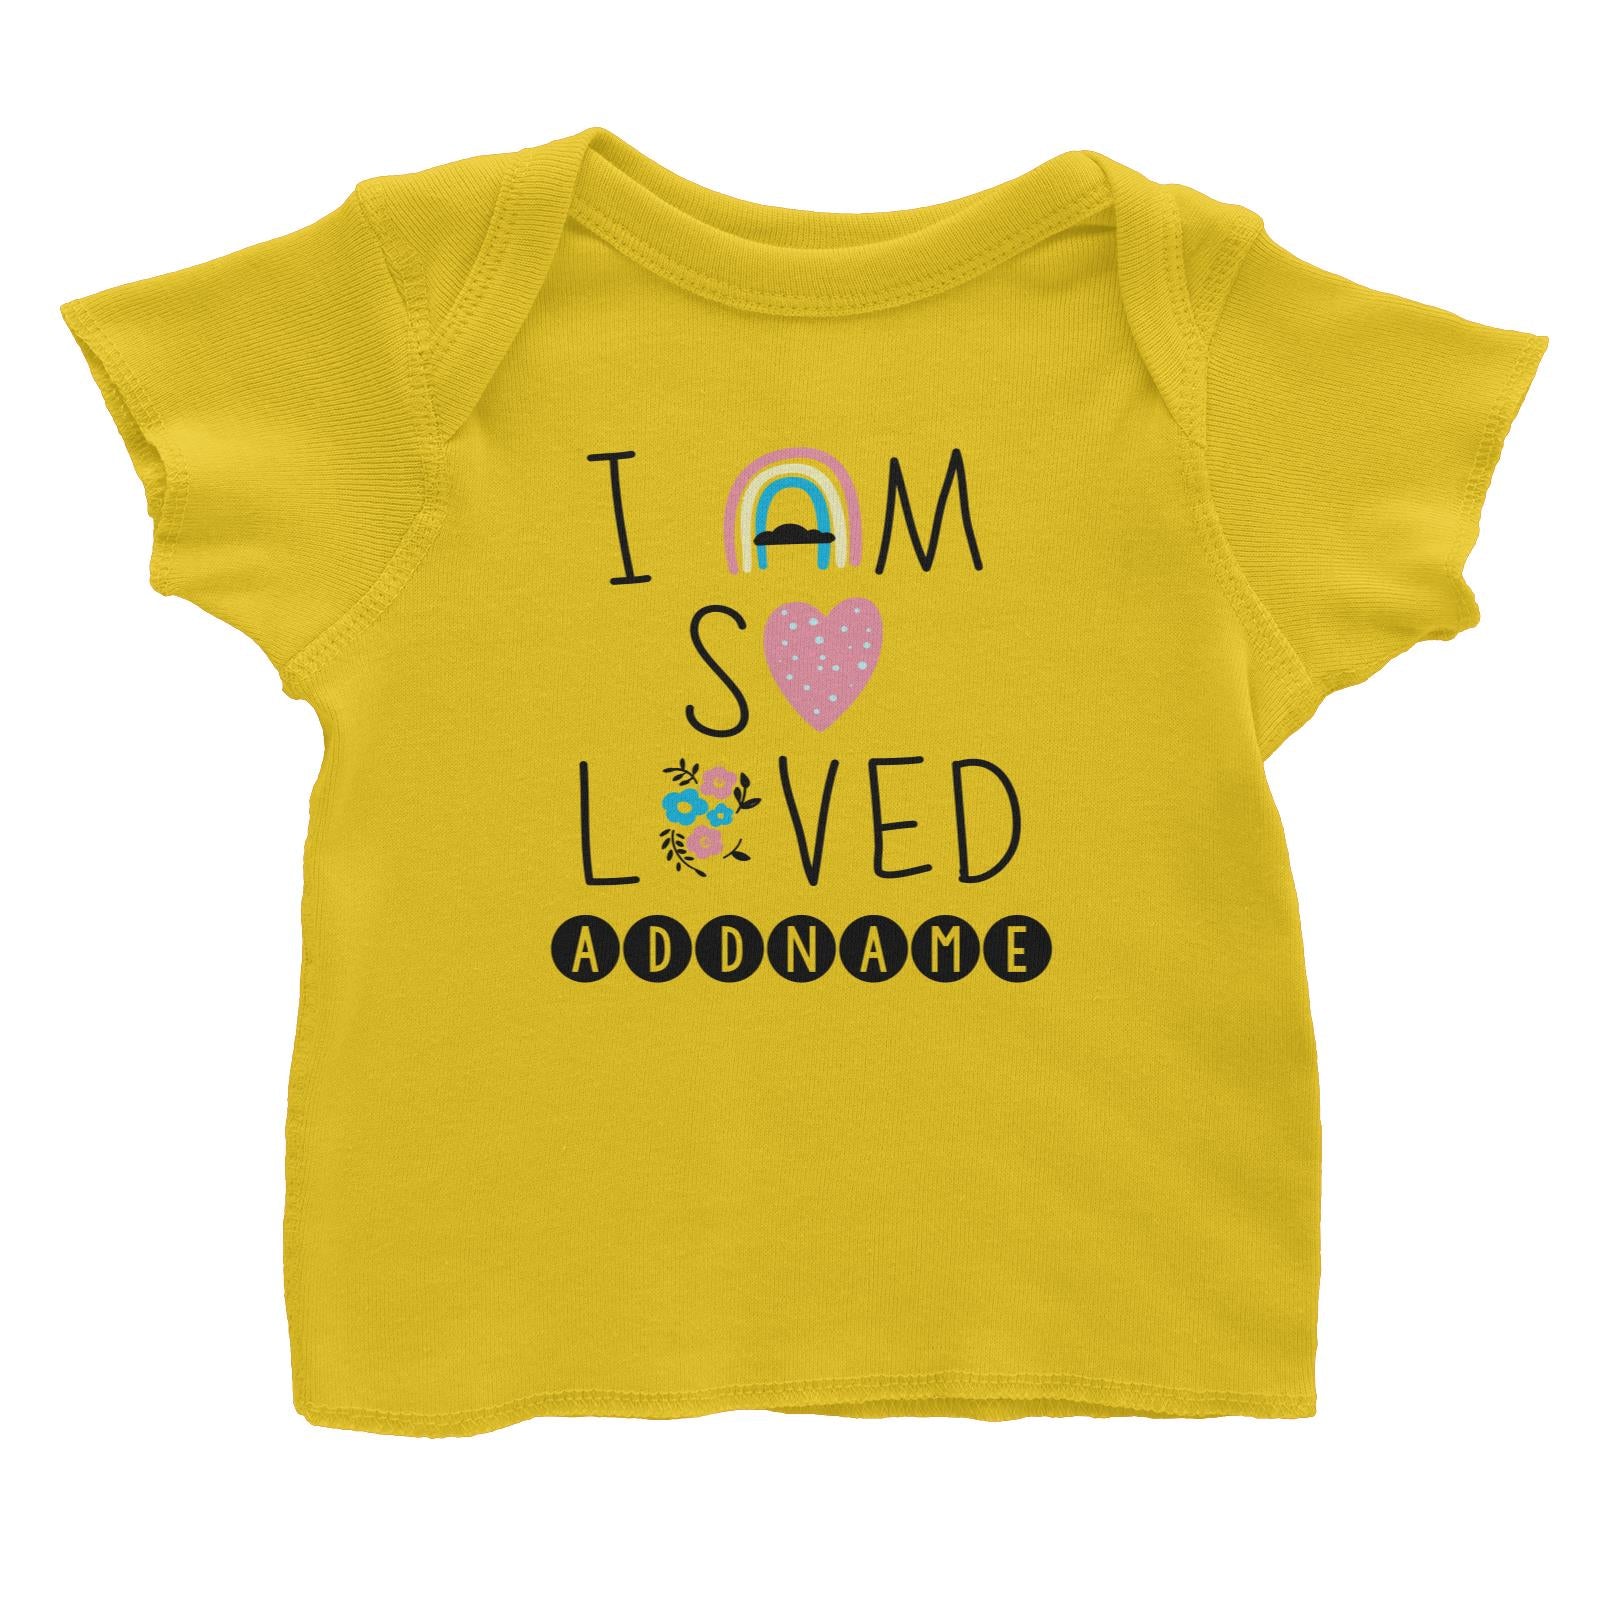 Children's Day Gift Series I Am So Loved Addname Baby T-Shirt